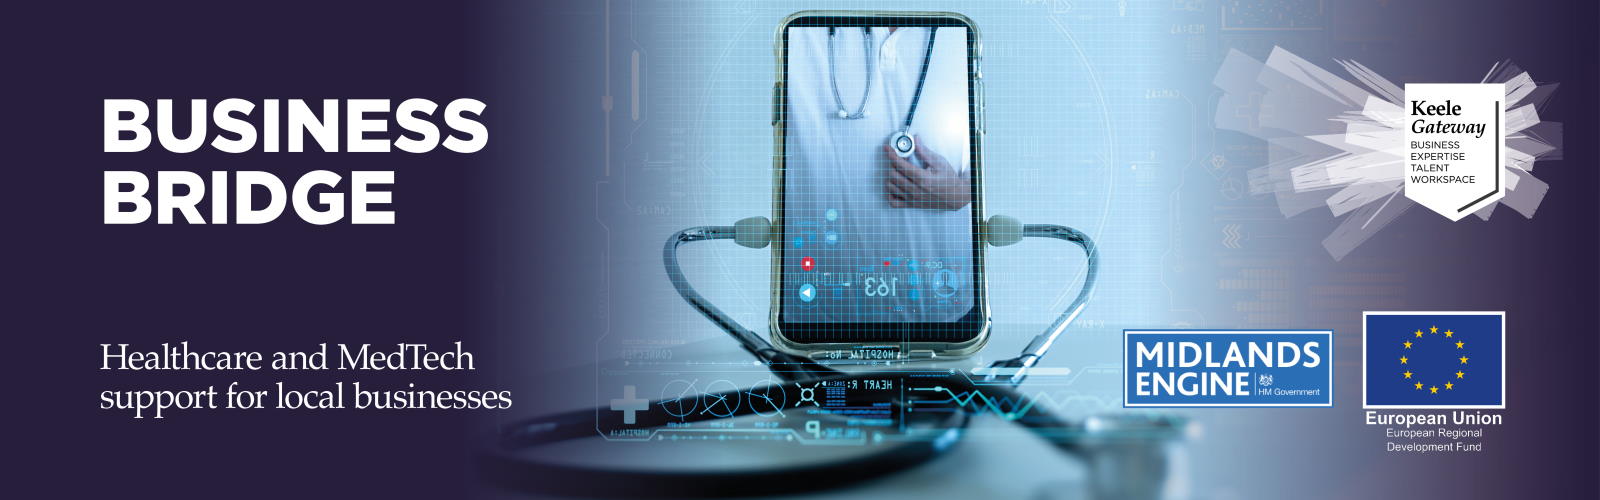 A photo of a mobile phone and a stethoscope, with the text: Business Bridge - Healthcare and MedTech support for local businesses, as well as logos for the Keele Gateway, Midlands Engine and the European Regional Development Fund.